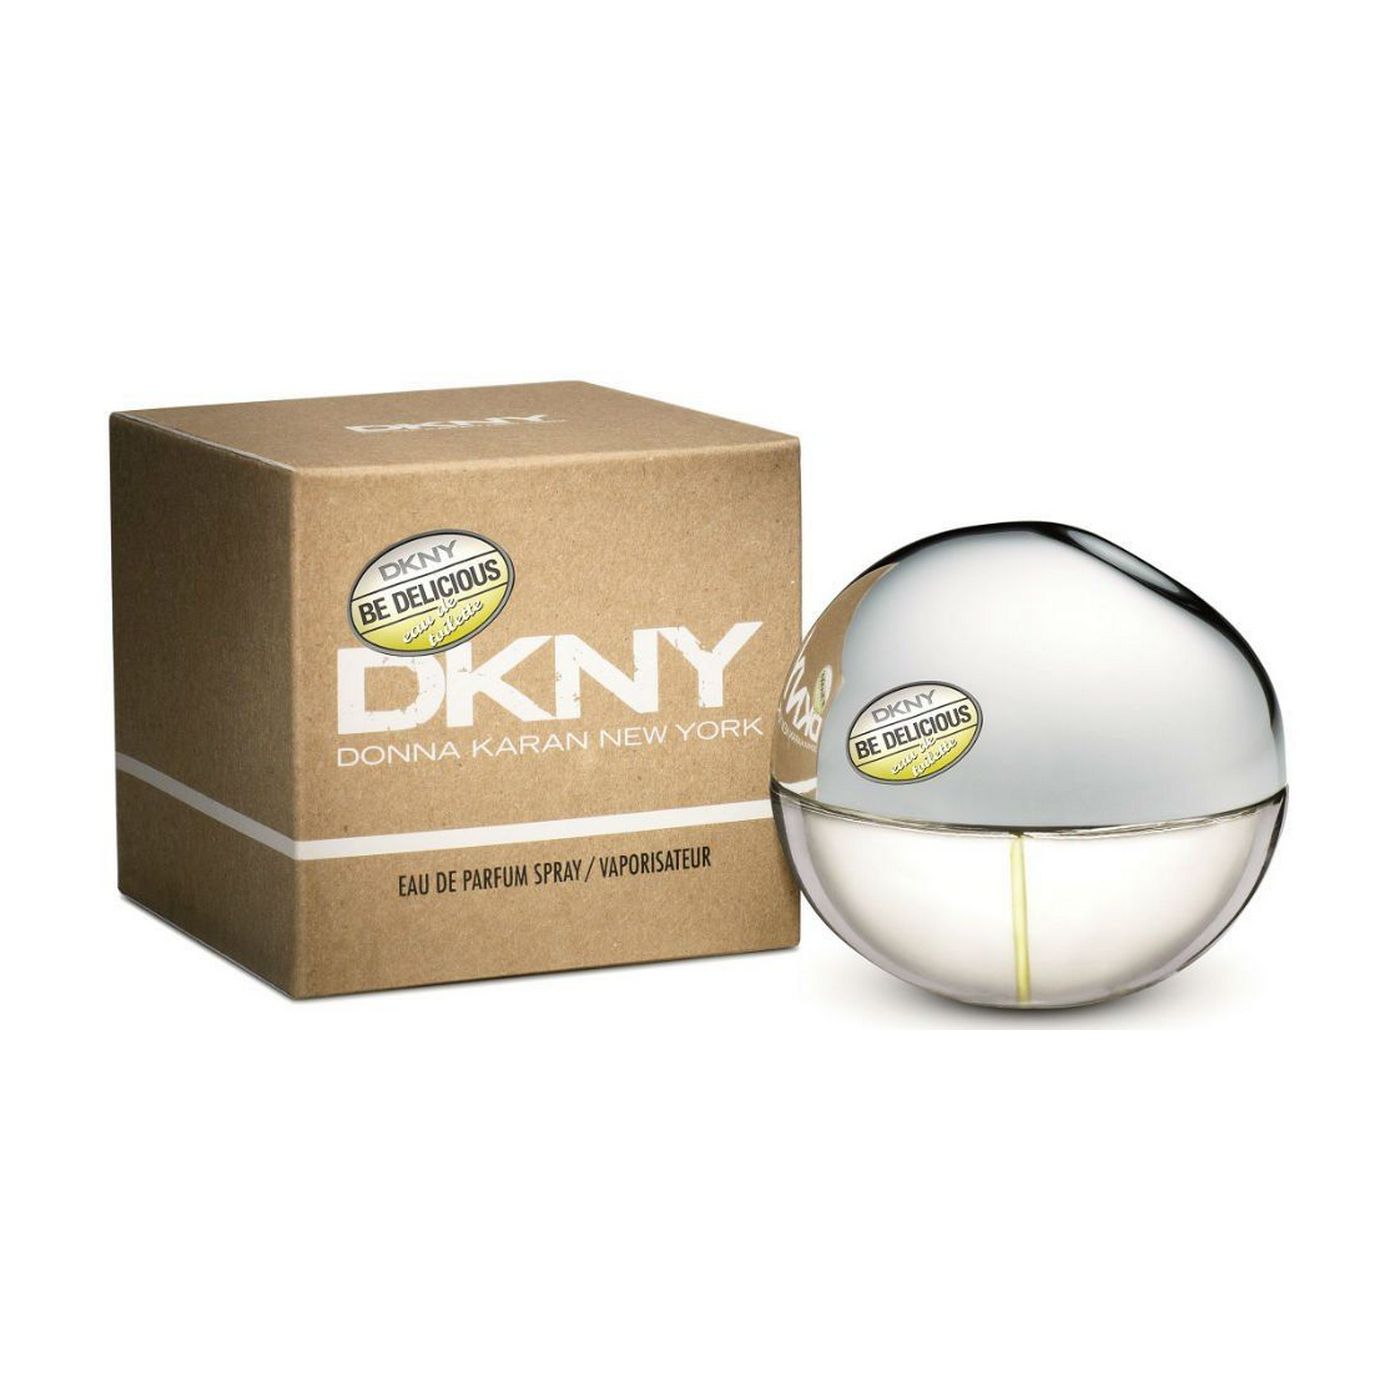 Donna karan dkny be delicious. DKNY be delicious туалетная вода жен, 50 мл. Donna Karan New York духи. DKNY Donna Karan New York be delicious.